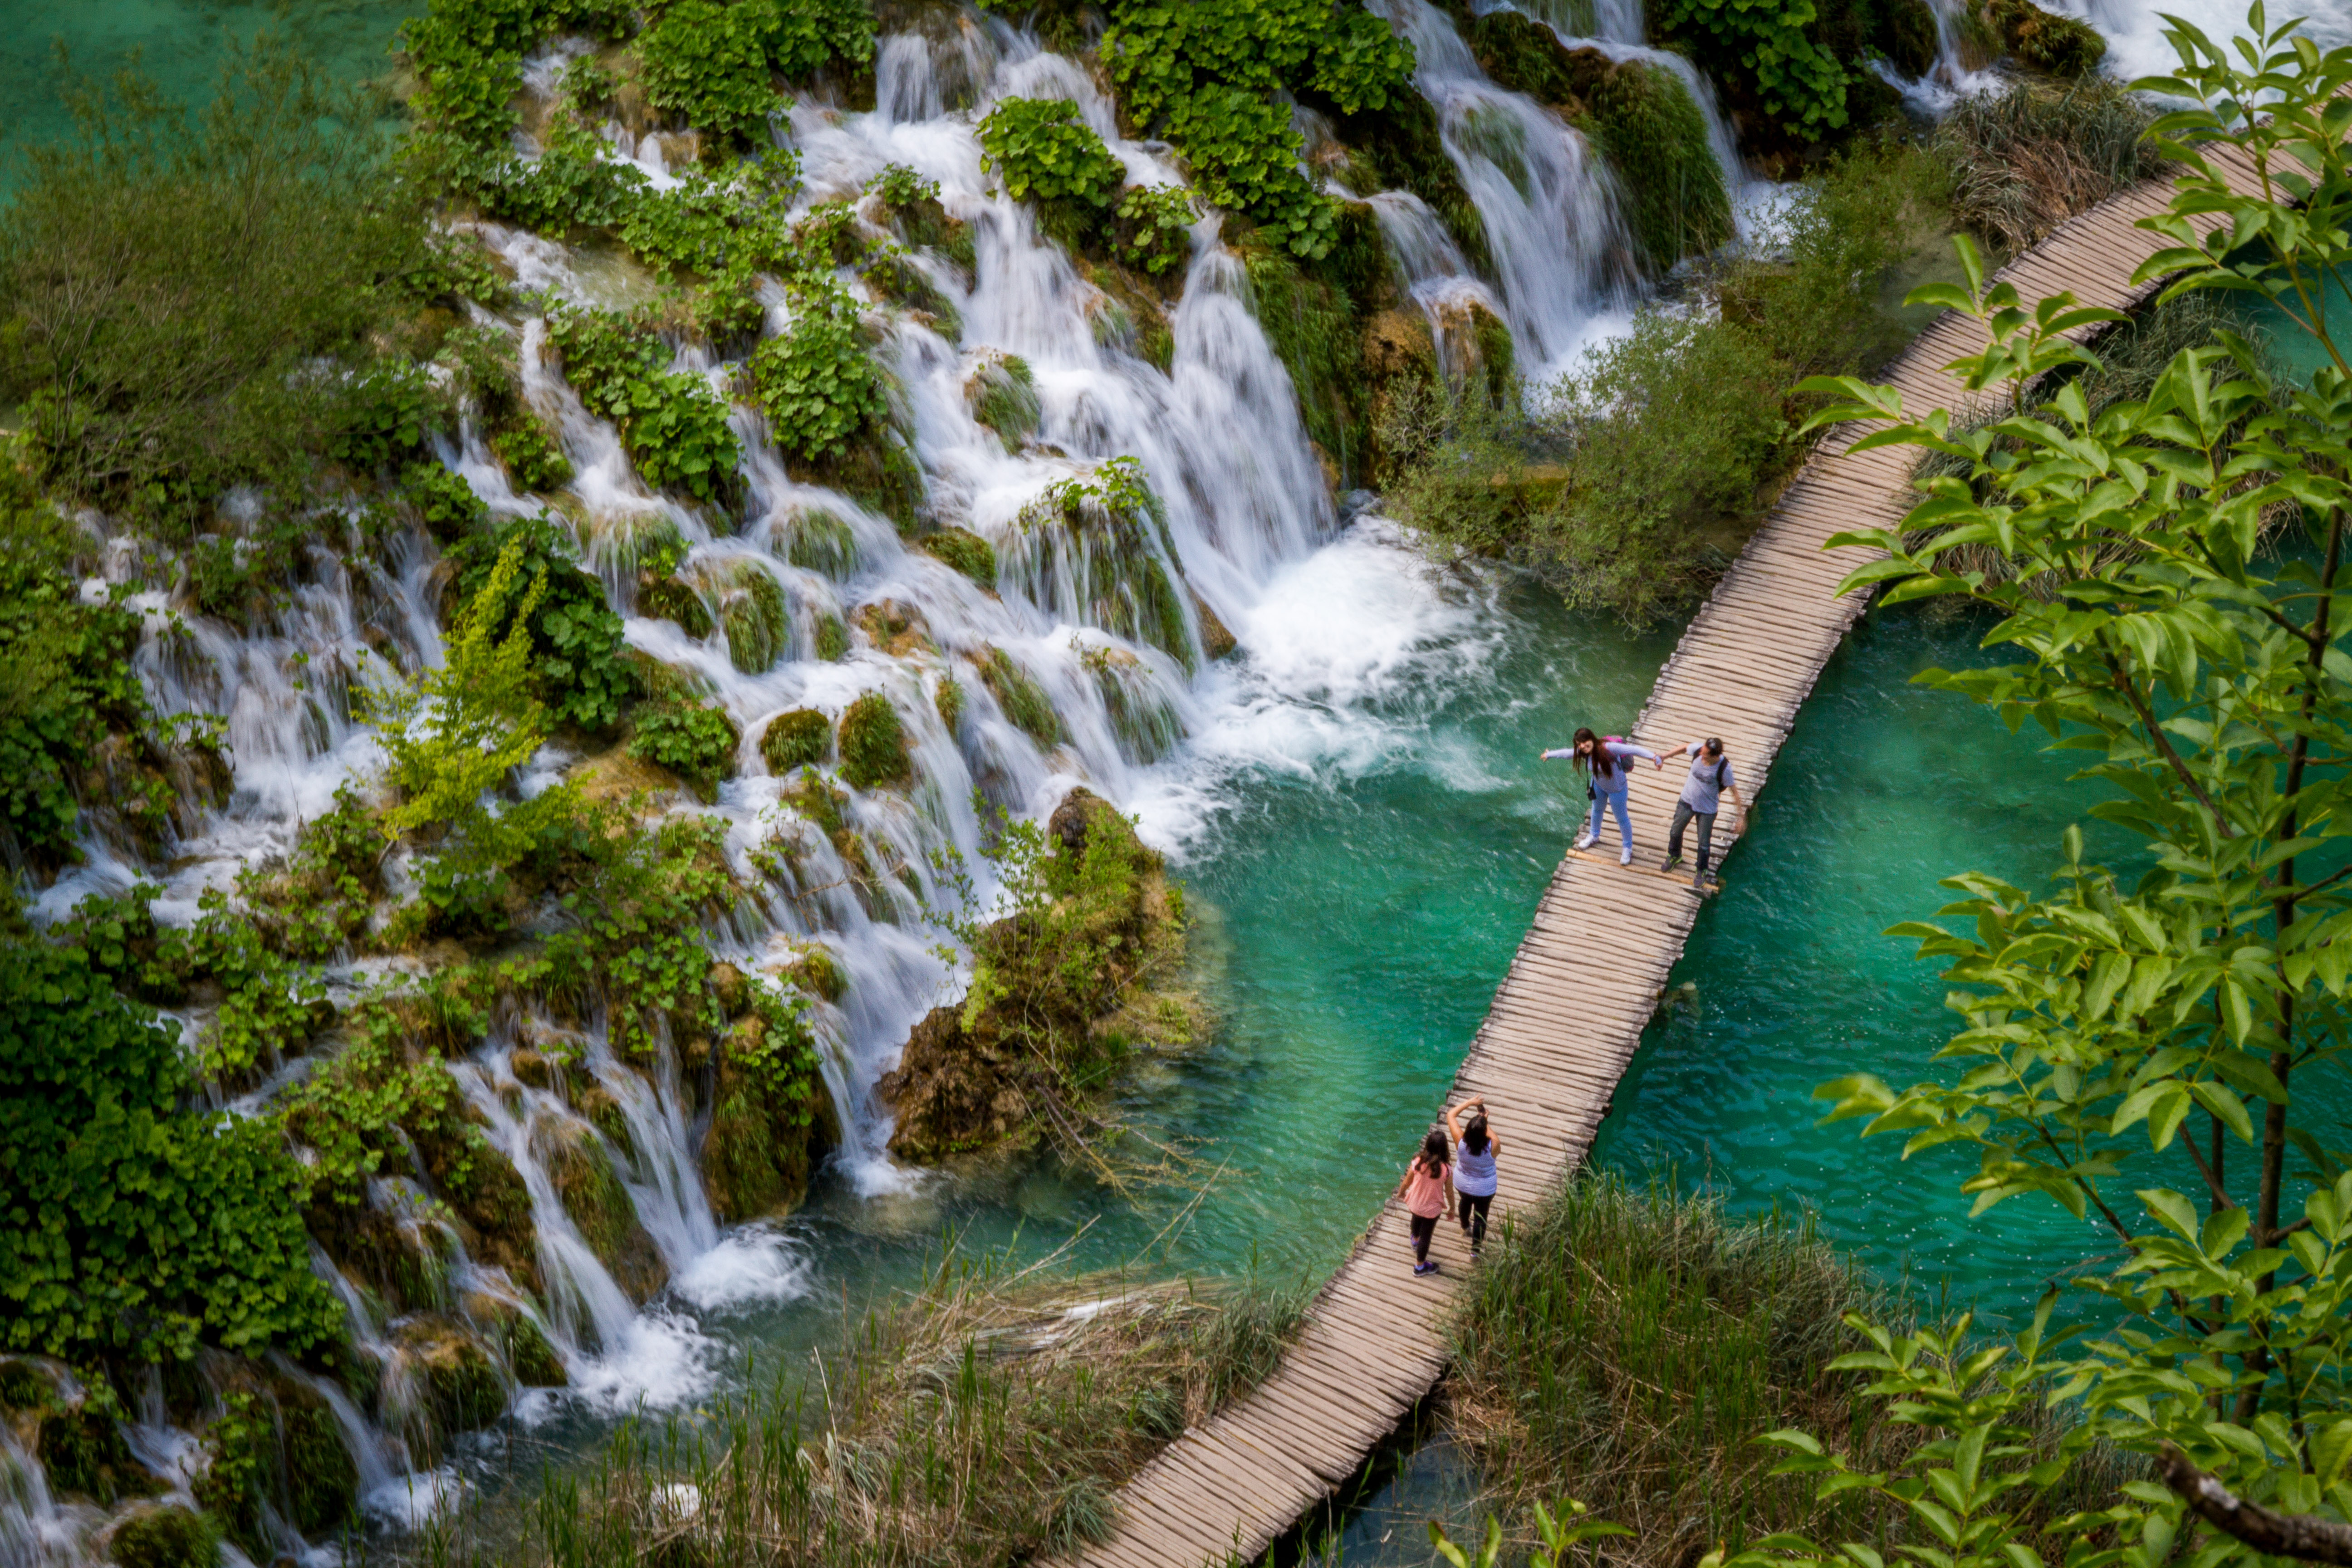 Plitvice Lakes National Park: Best Park in Central Europe